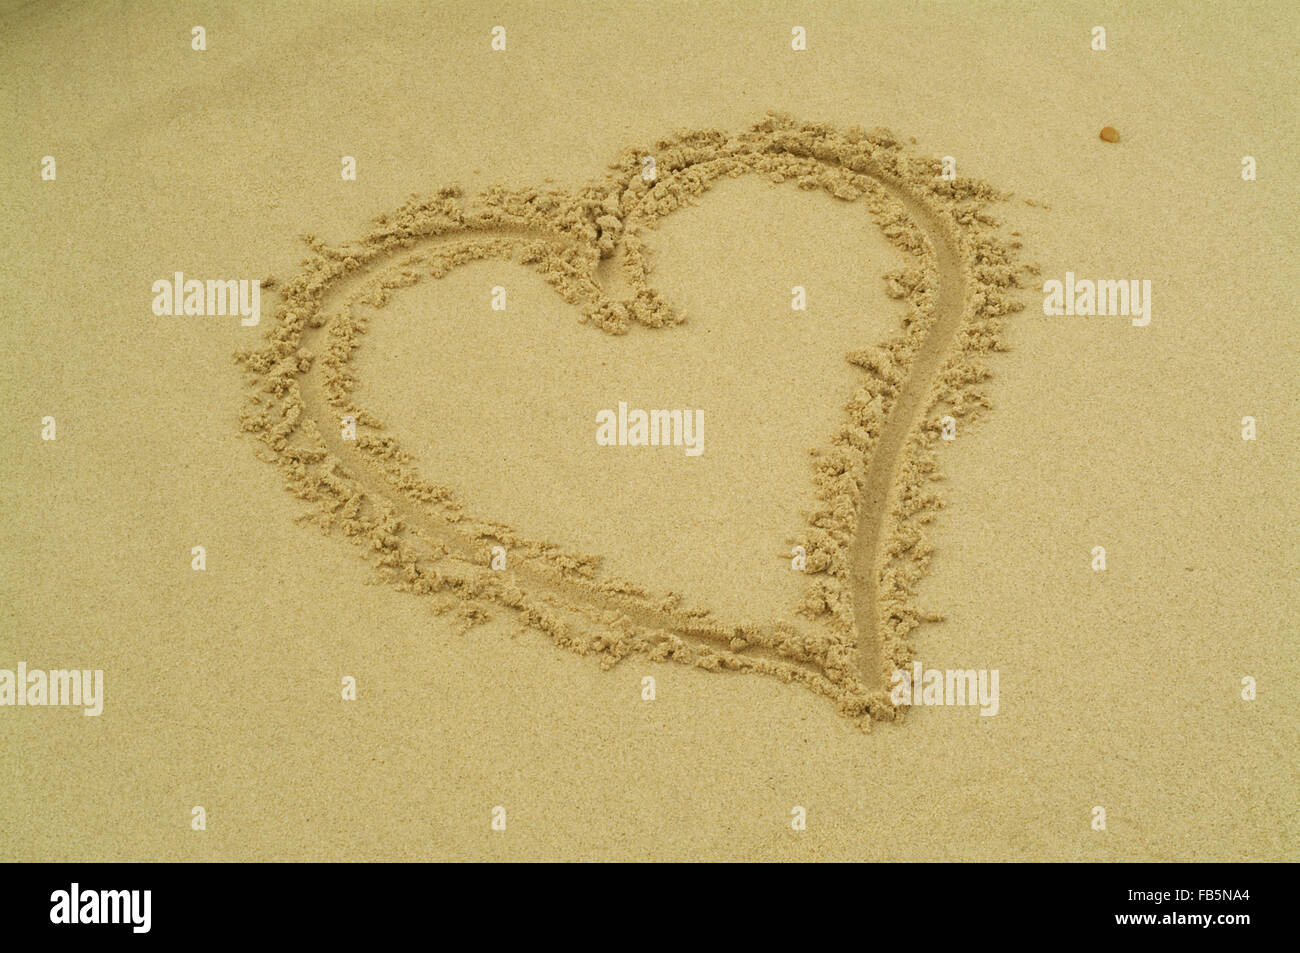 A heart painted in the sand beach Stock Photo